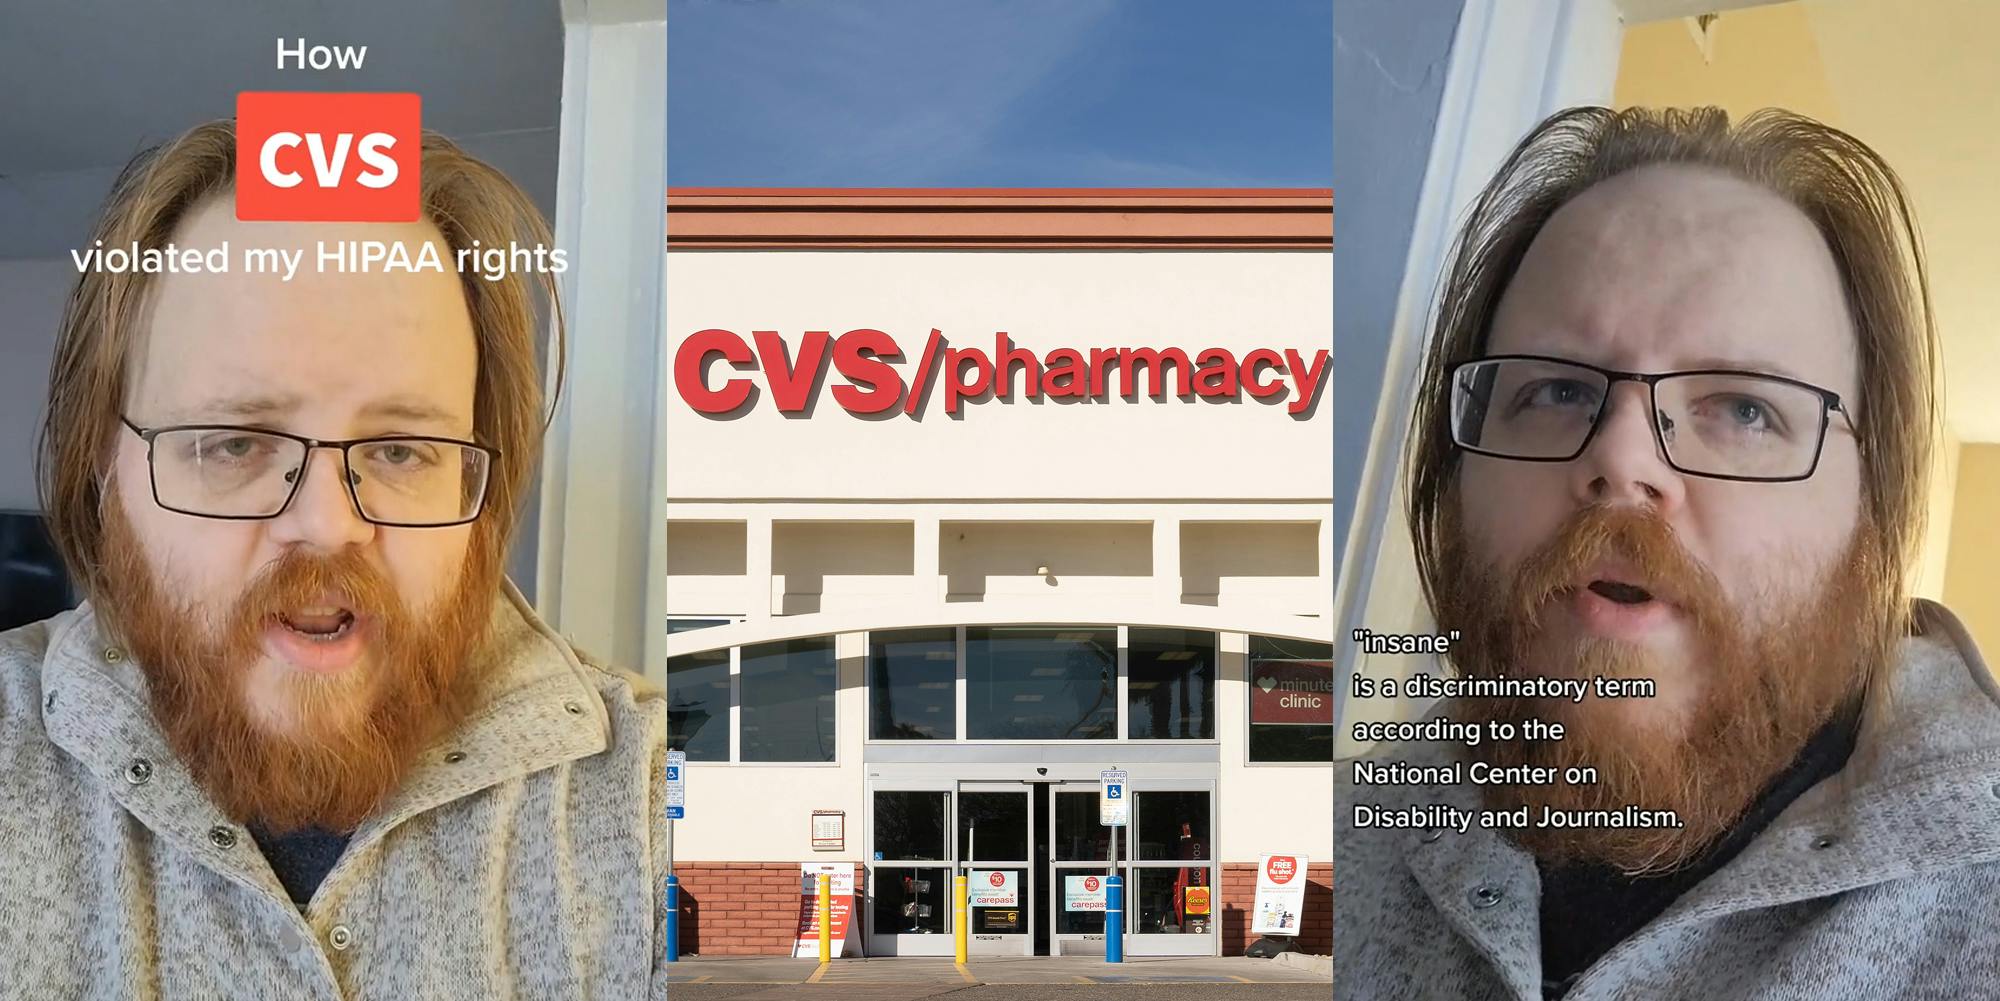 man speaking with caption "How CVS violated my HIPAA rights" (l) CVS store with sign and sky (c) man speaking with caption ""insane" is a discriminatory term according to the National Center on Disability and Journalism" (r)